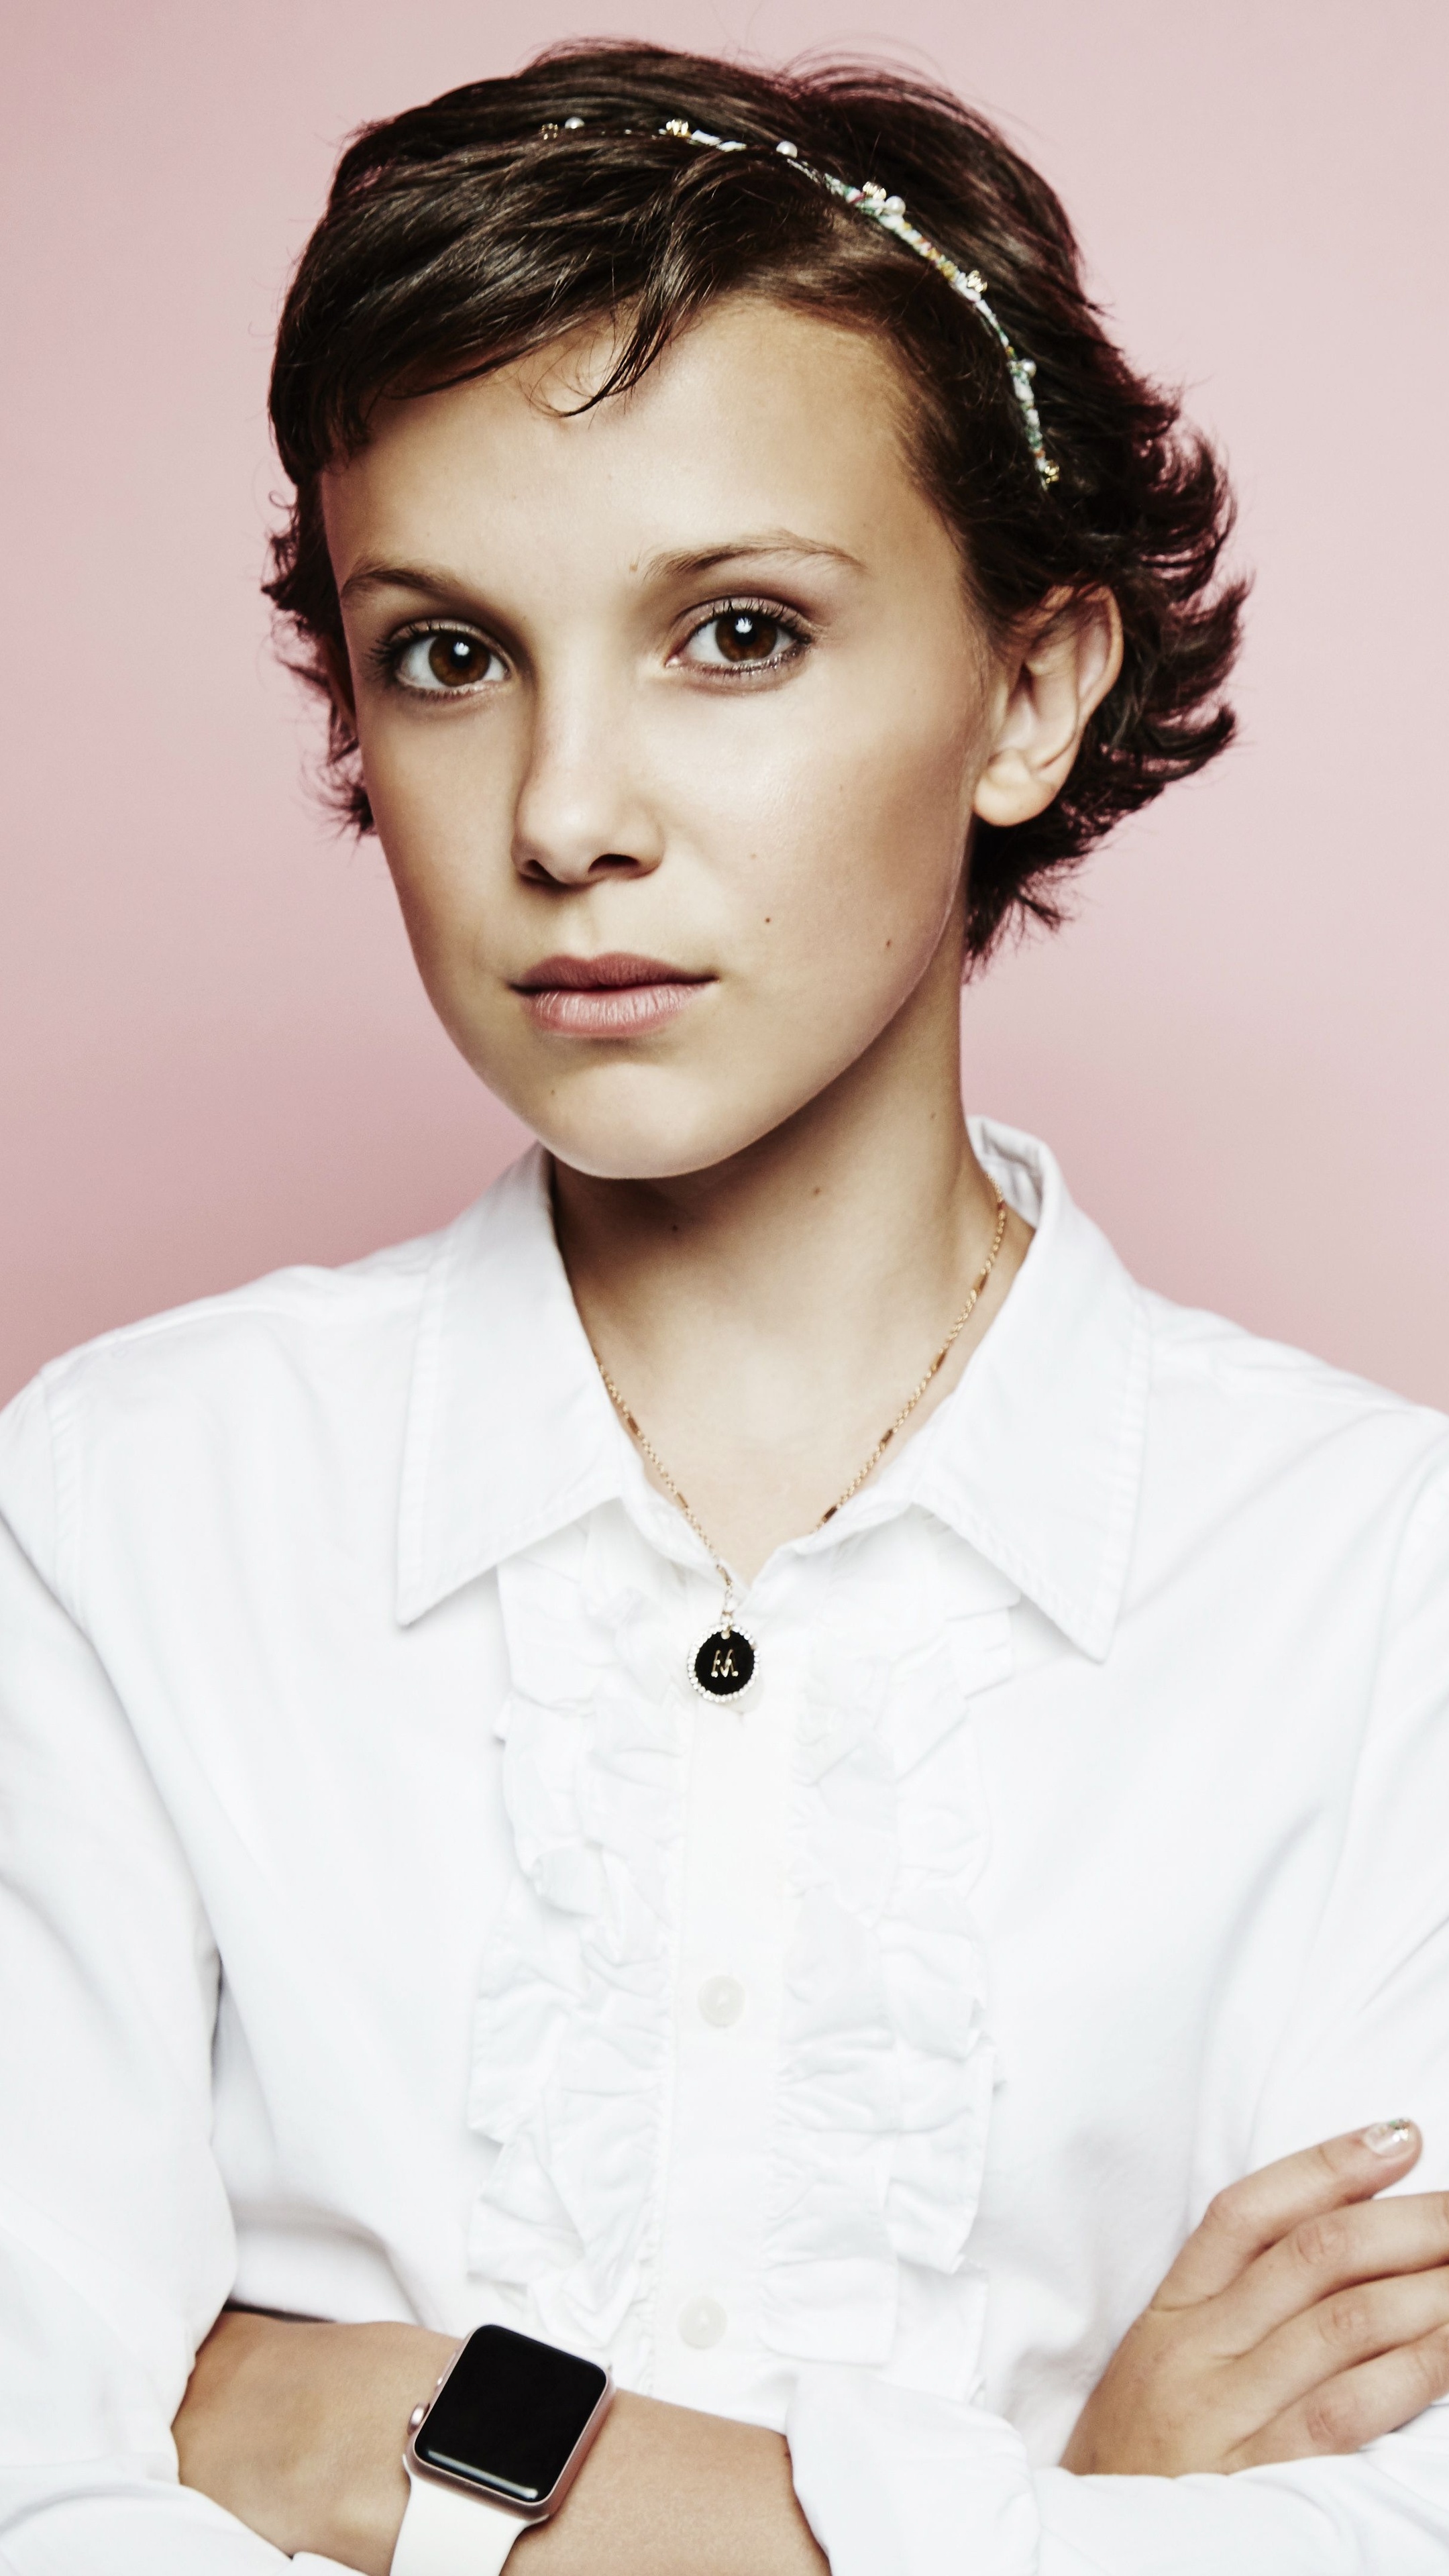 Millie Bobby Brown: Made guest appearances in the CBS police procedural drama NCIS. 2160x3840 4K Wallpaper.